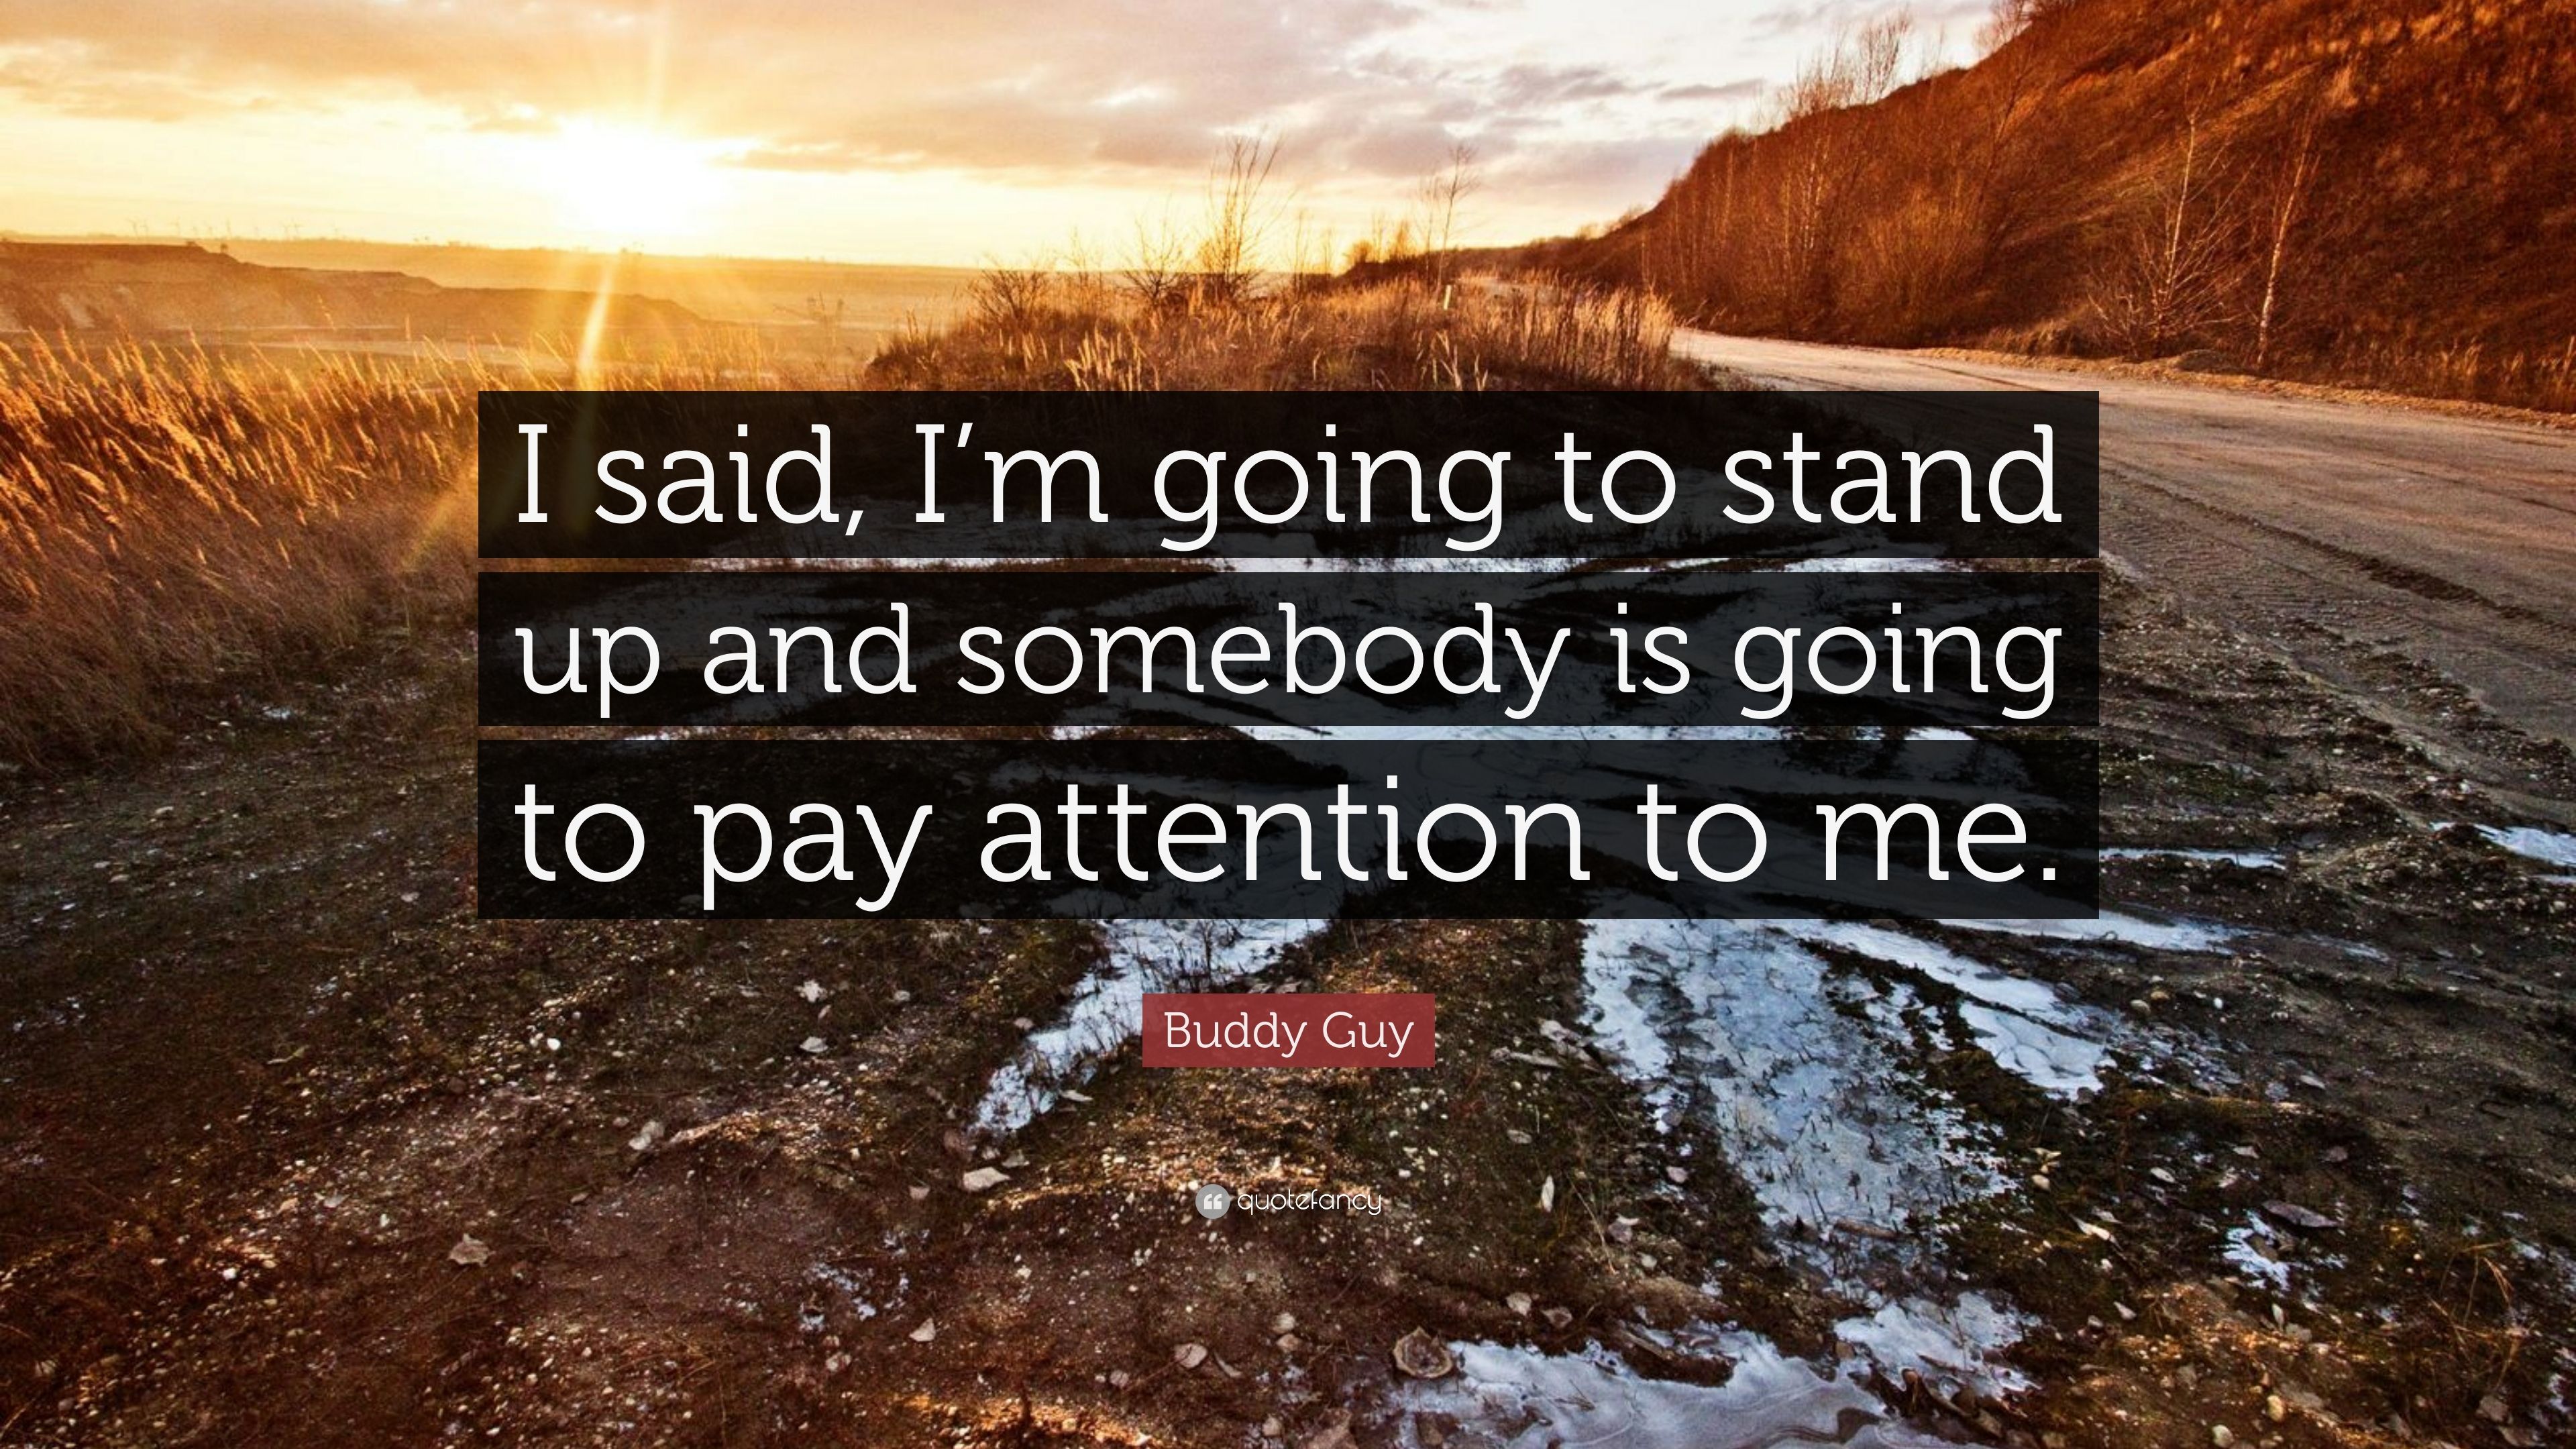 Buddy Guy Quote: “I said, I'm going to stand up and somebody is